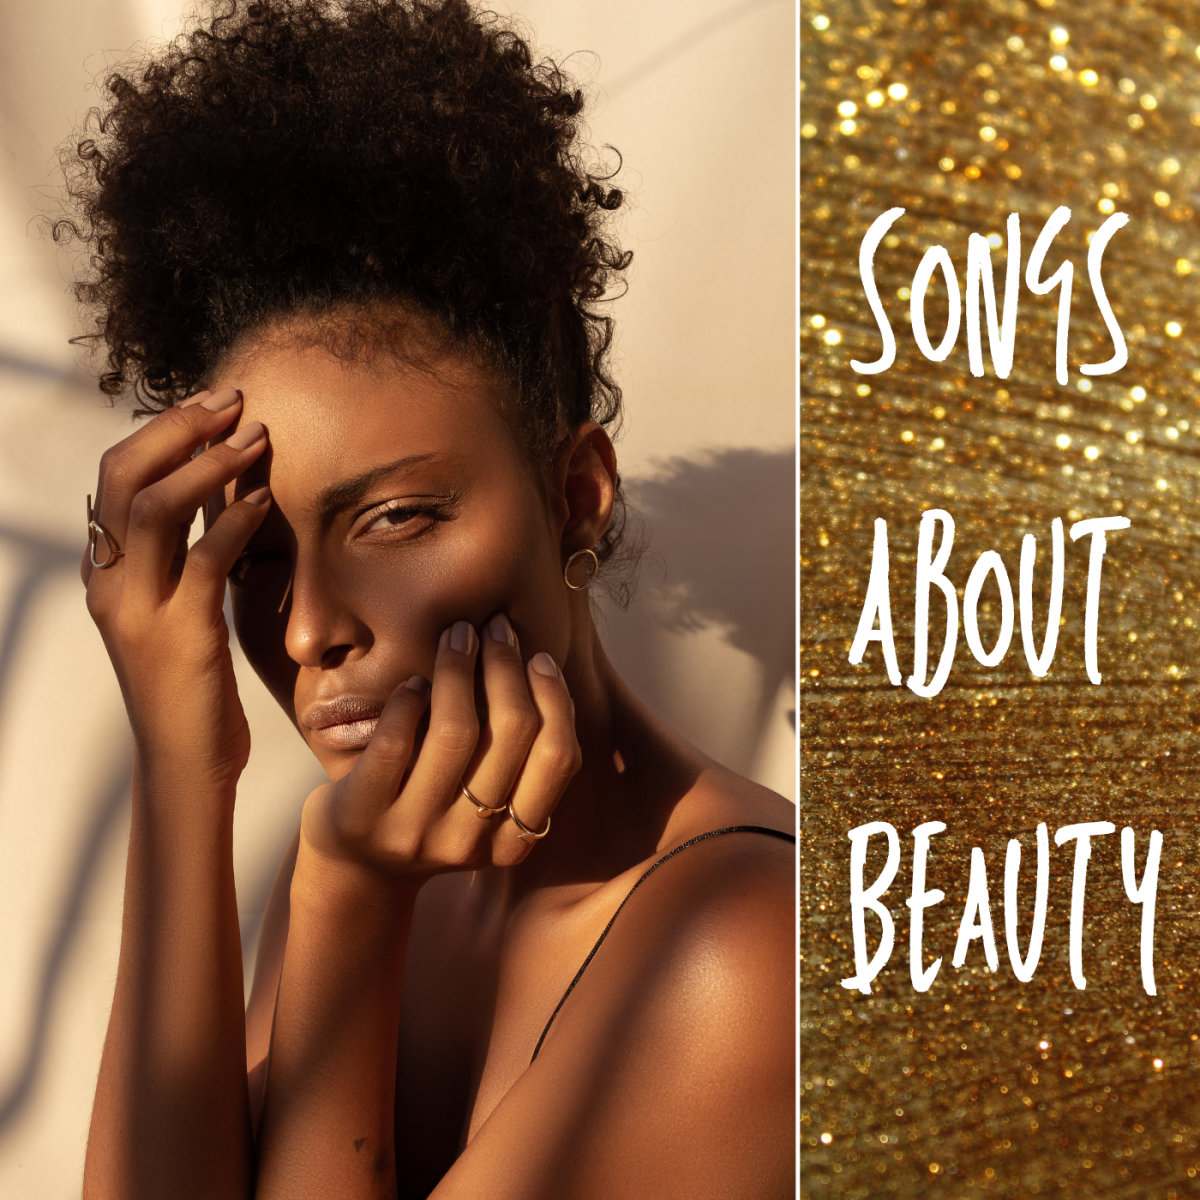 20 Songs About Beauty